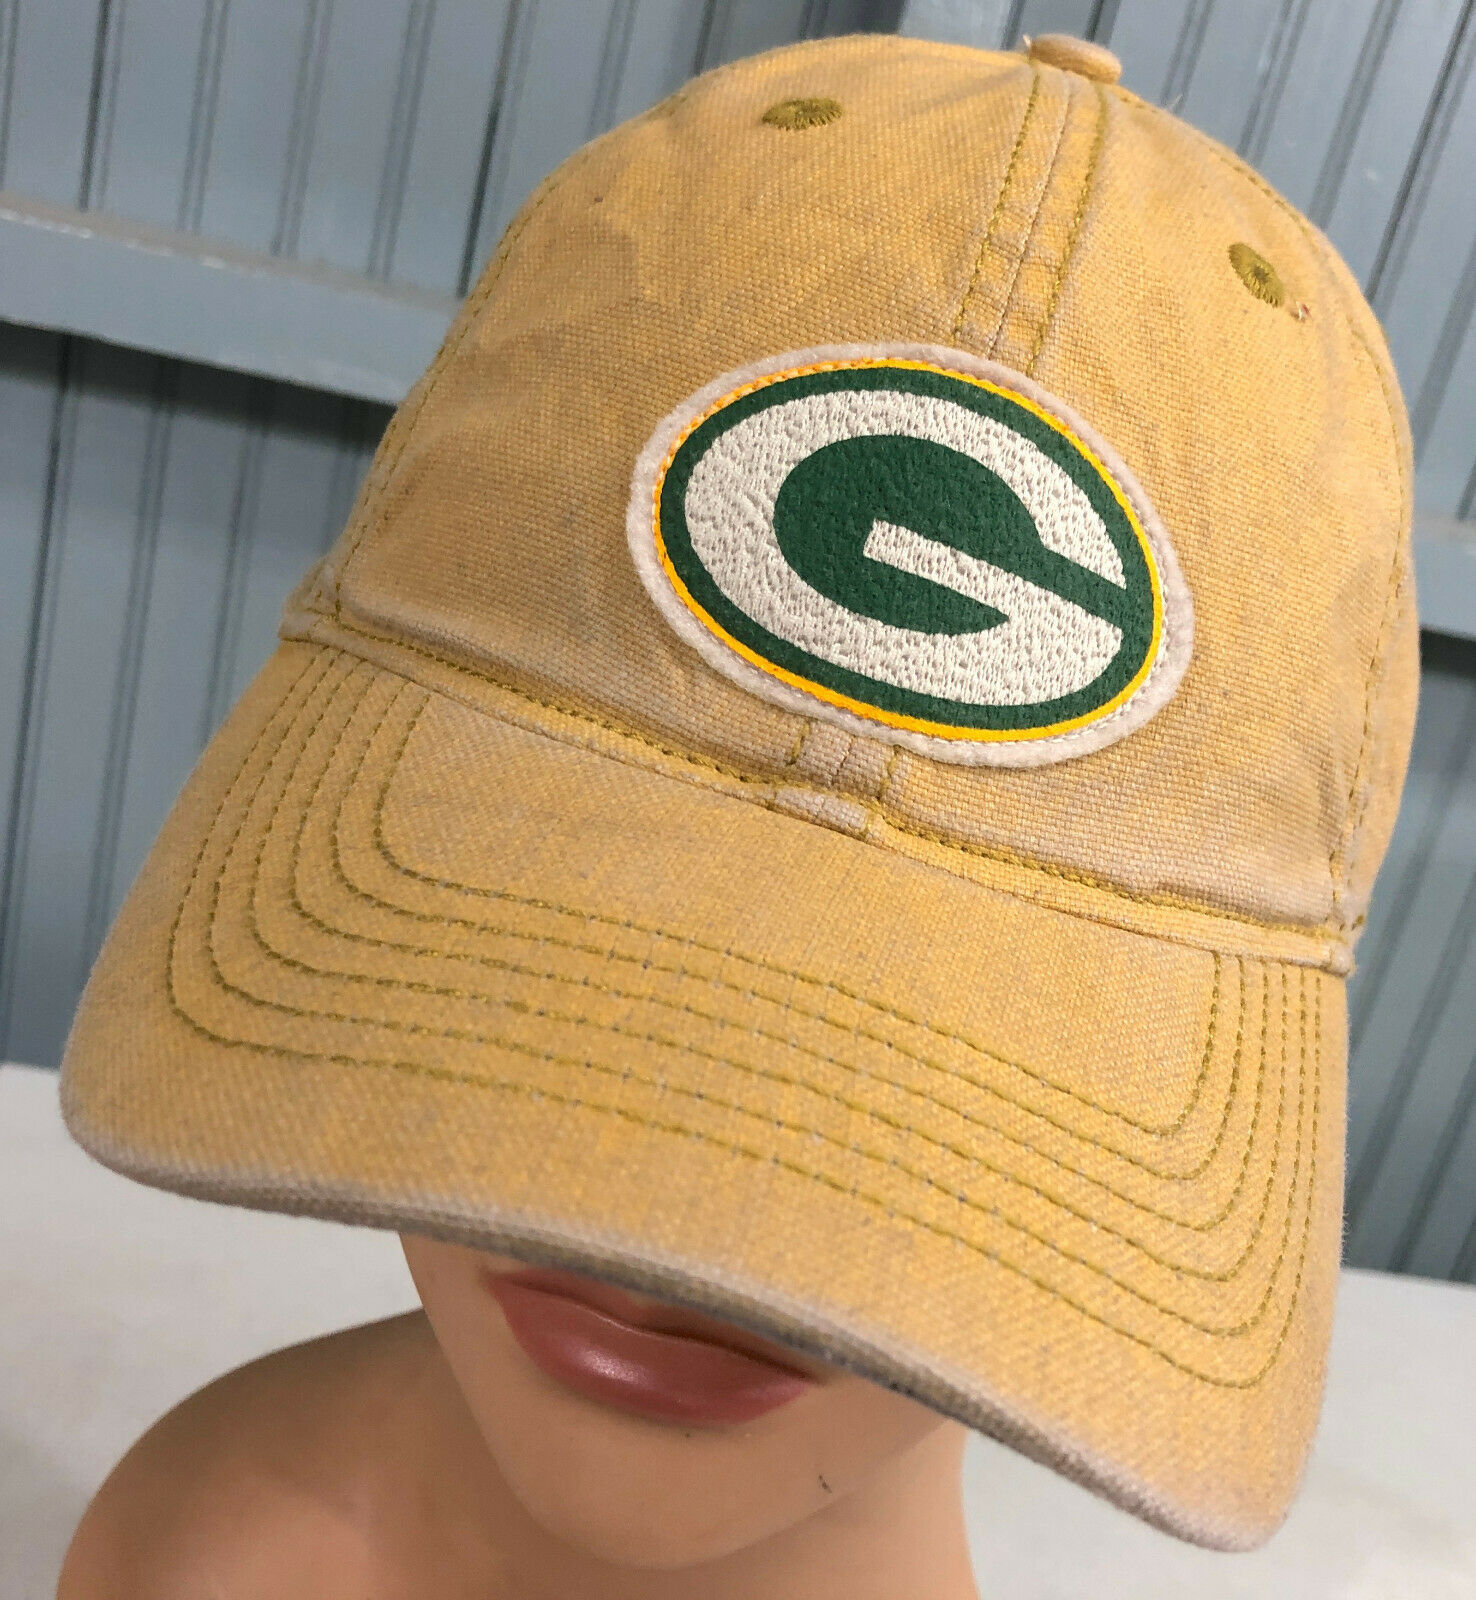 Primary image for Green Bay Packers Vintage Collection Beat Up Distressed S/M Baseball Hat Cap